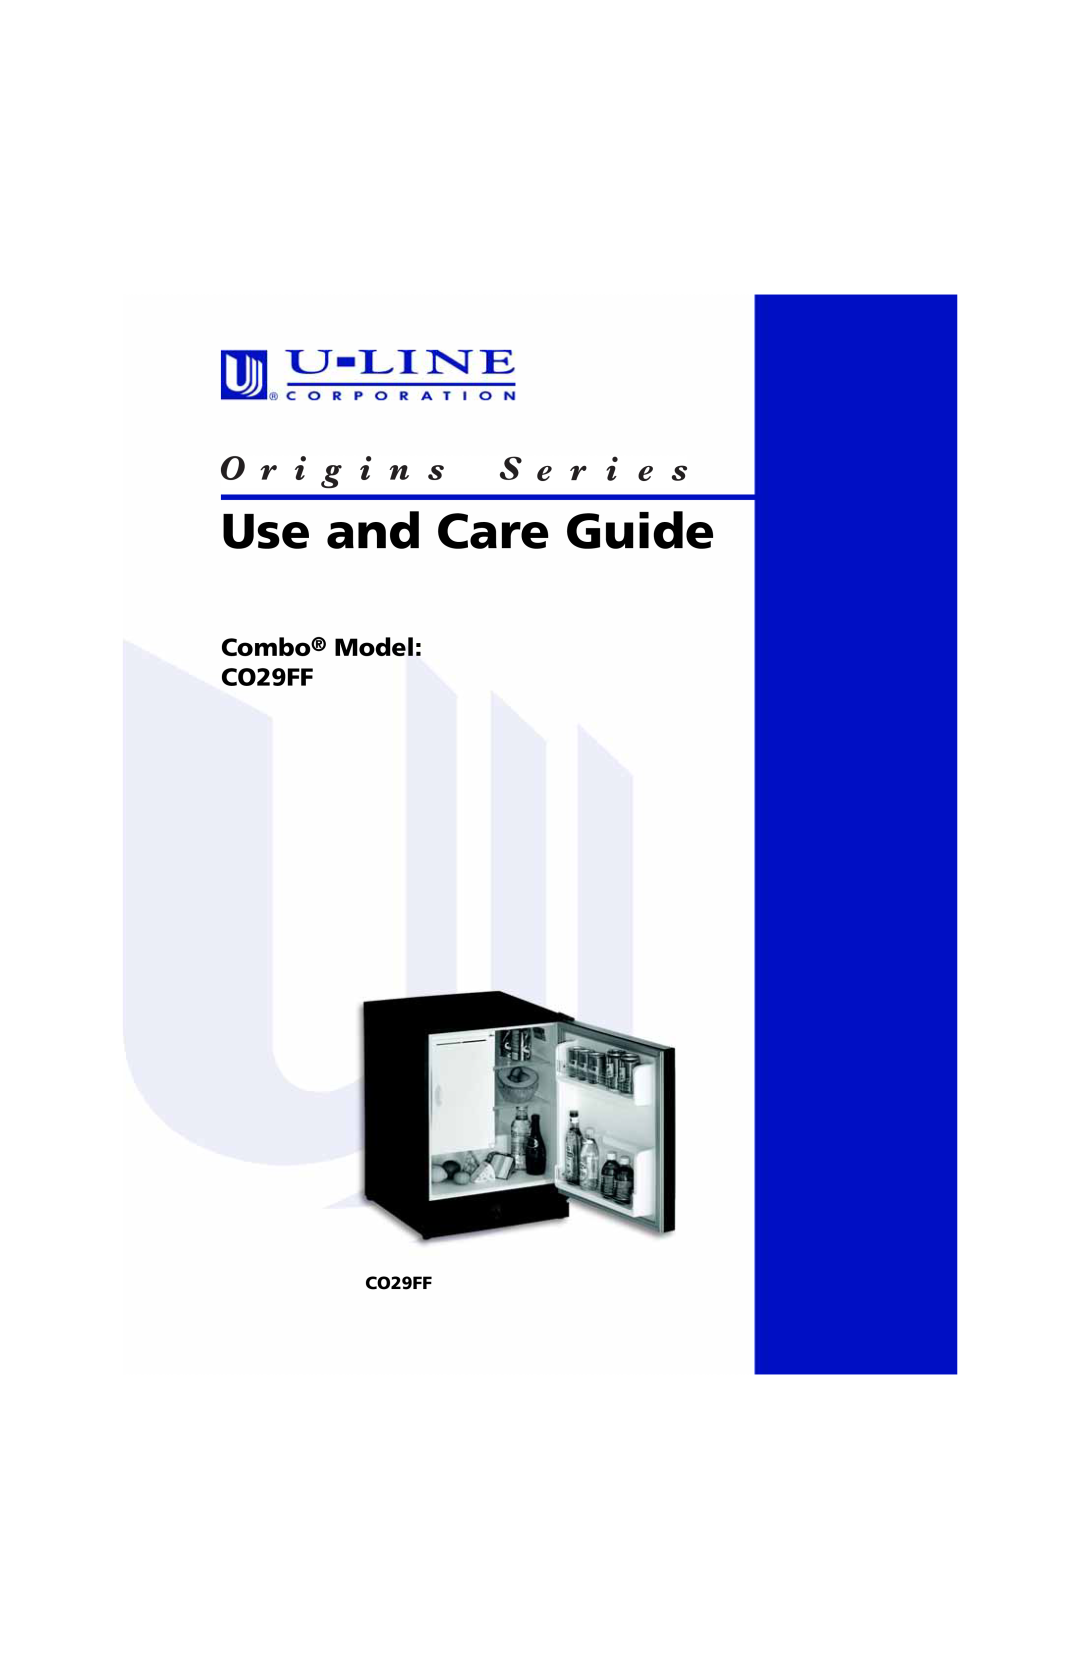 U-Line manual Use and Care Guide, Combo Model CO29FF 